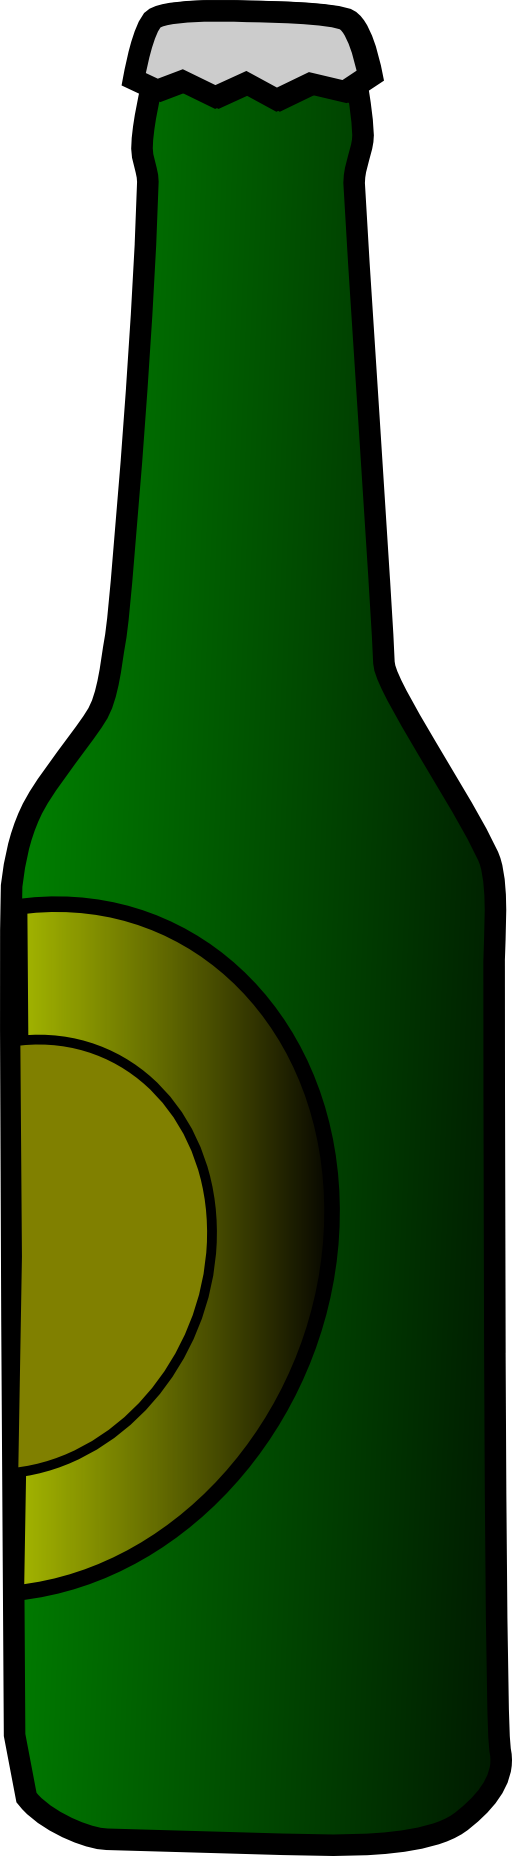 Beer Bottle Clipart I2clipart Royalty Free Public Domain Clipart